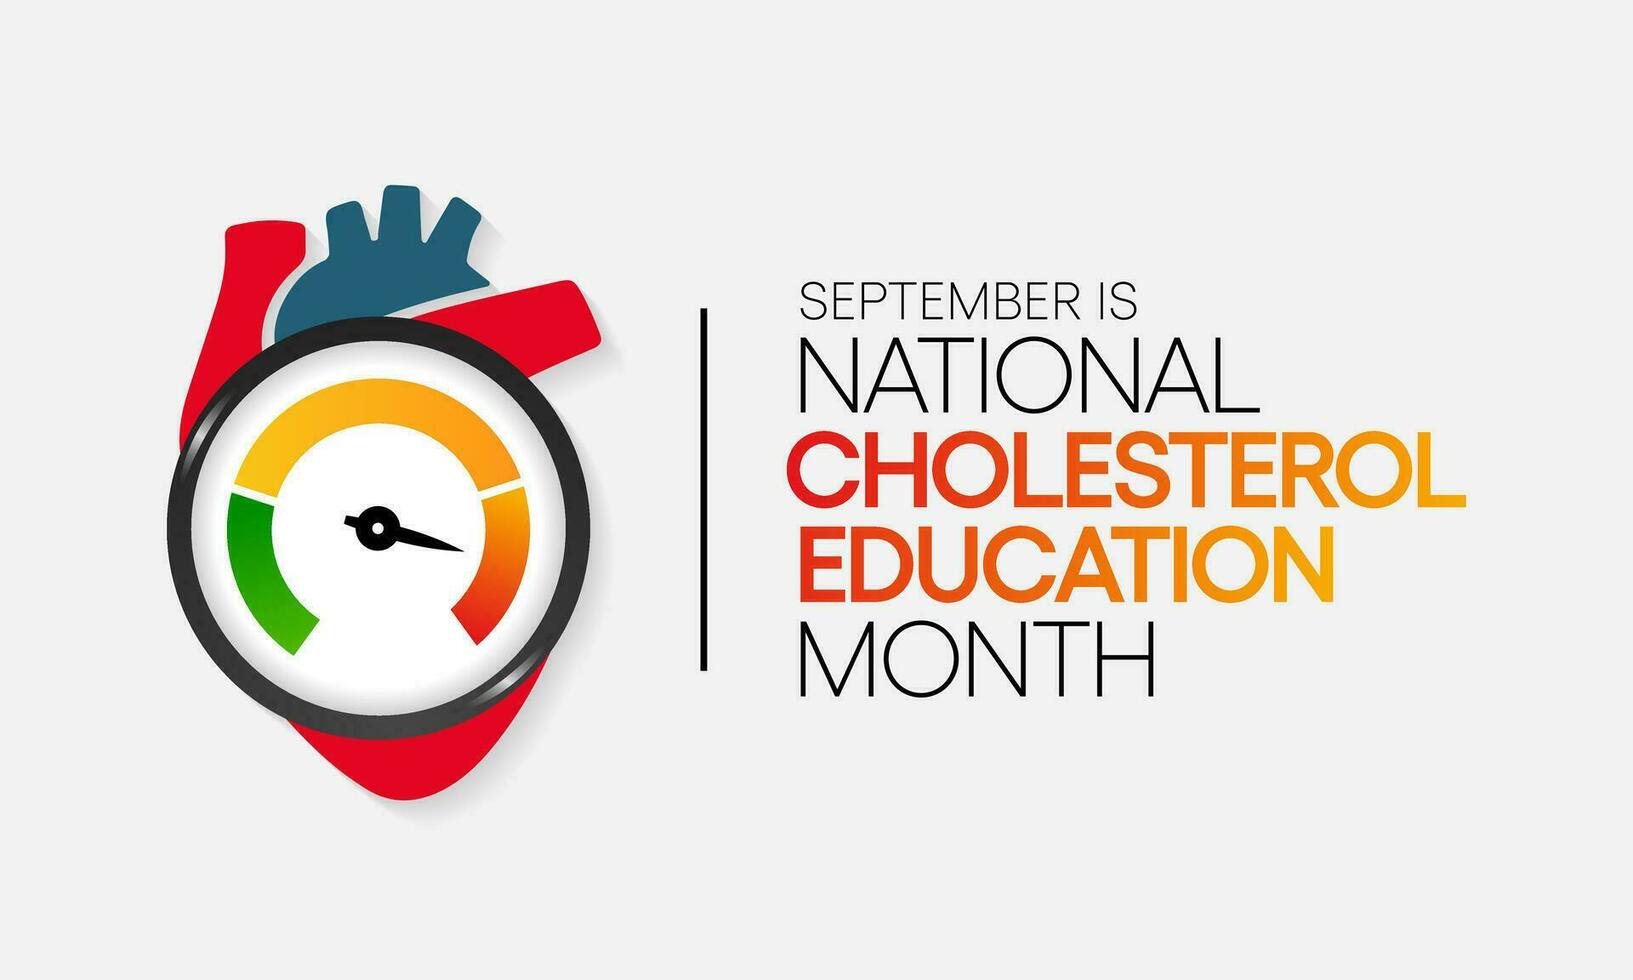 National Cholesterol Education month is observed every year during September, to raise awareness about cardiovascular disease, cholesterol, and stroke. Vector illustration